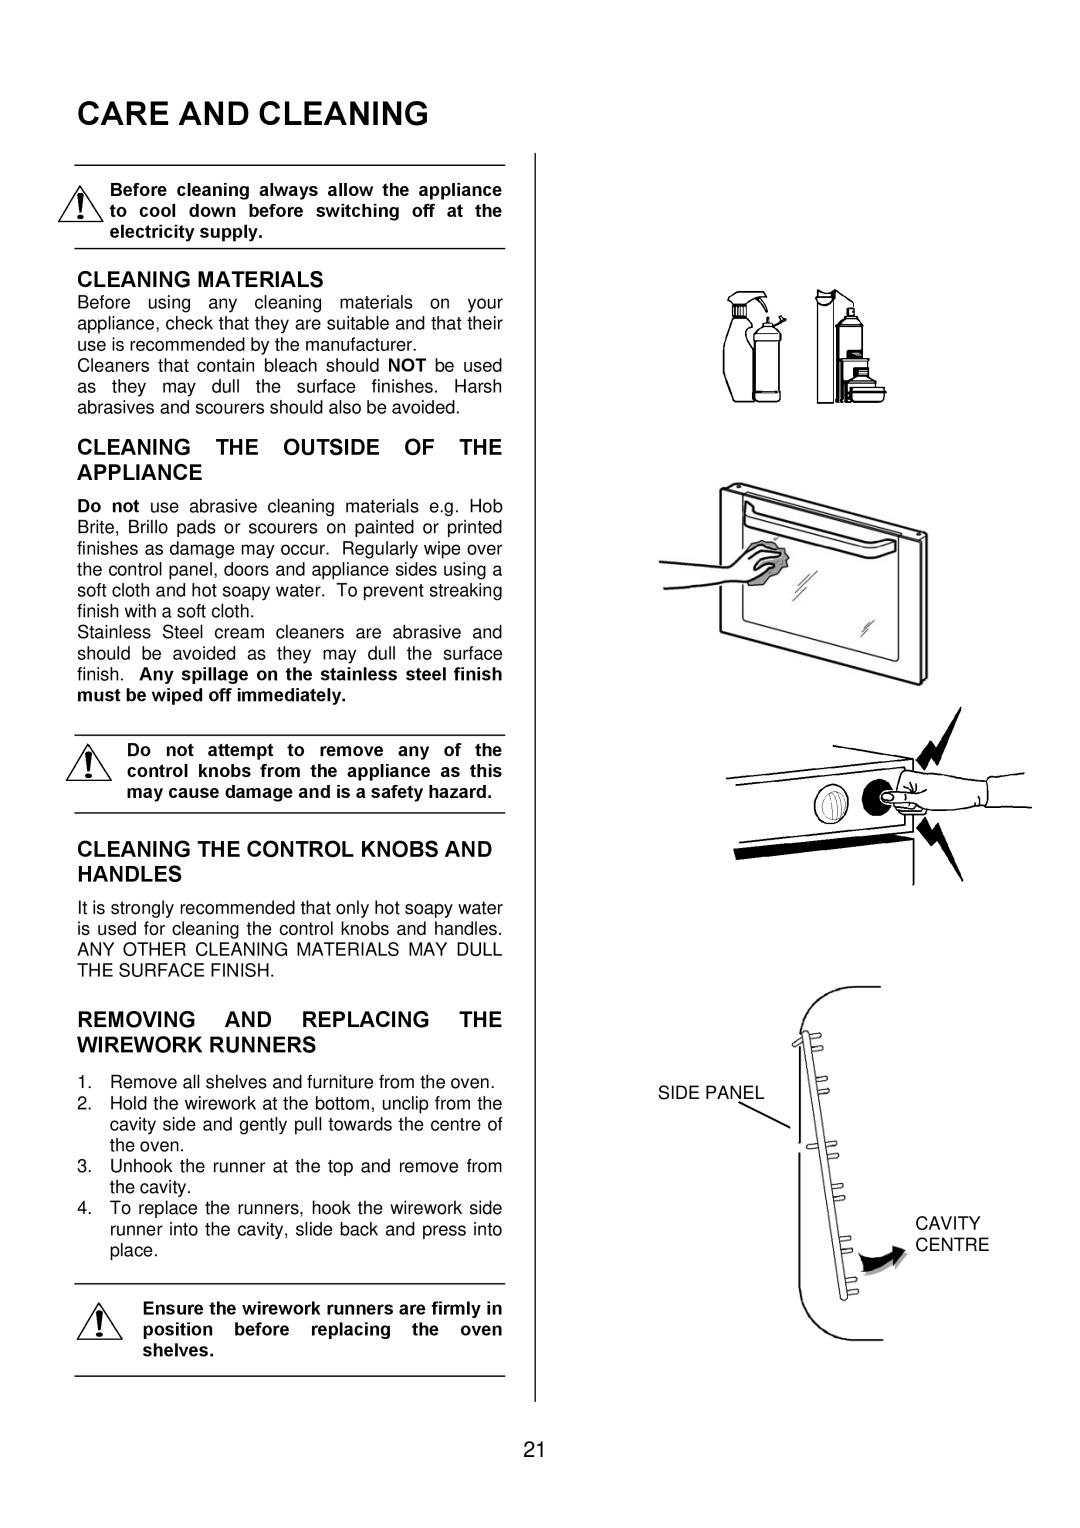 Electrolux EKM6047 user manual Care and Cleaning, Cleaning Materials, Cleaning the Outside of the Appliance 